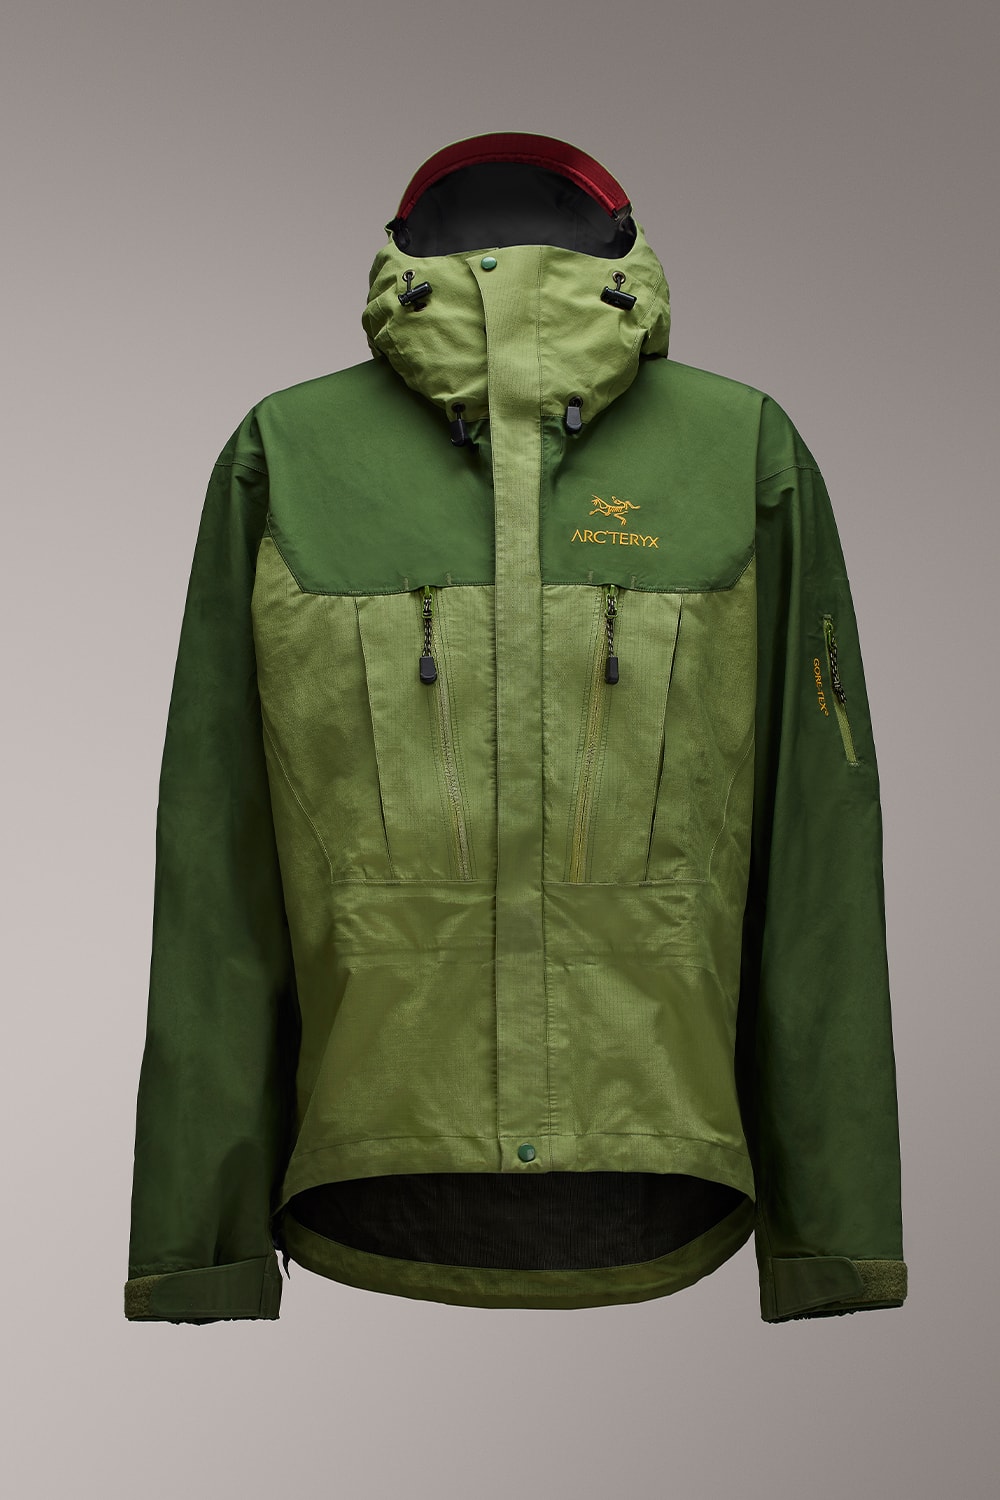 Arc’teryx Updates its Iconic Alpha SV Jacket Gore-Tex Pro Waterproof Fashion North Face Patagonia